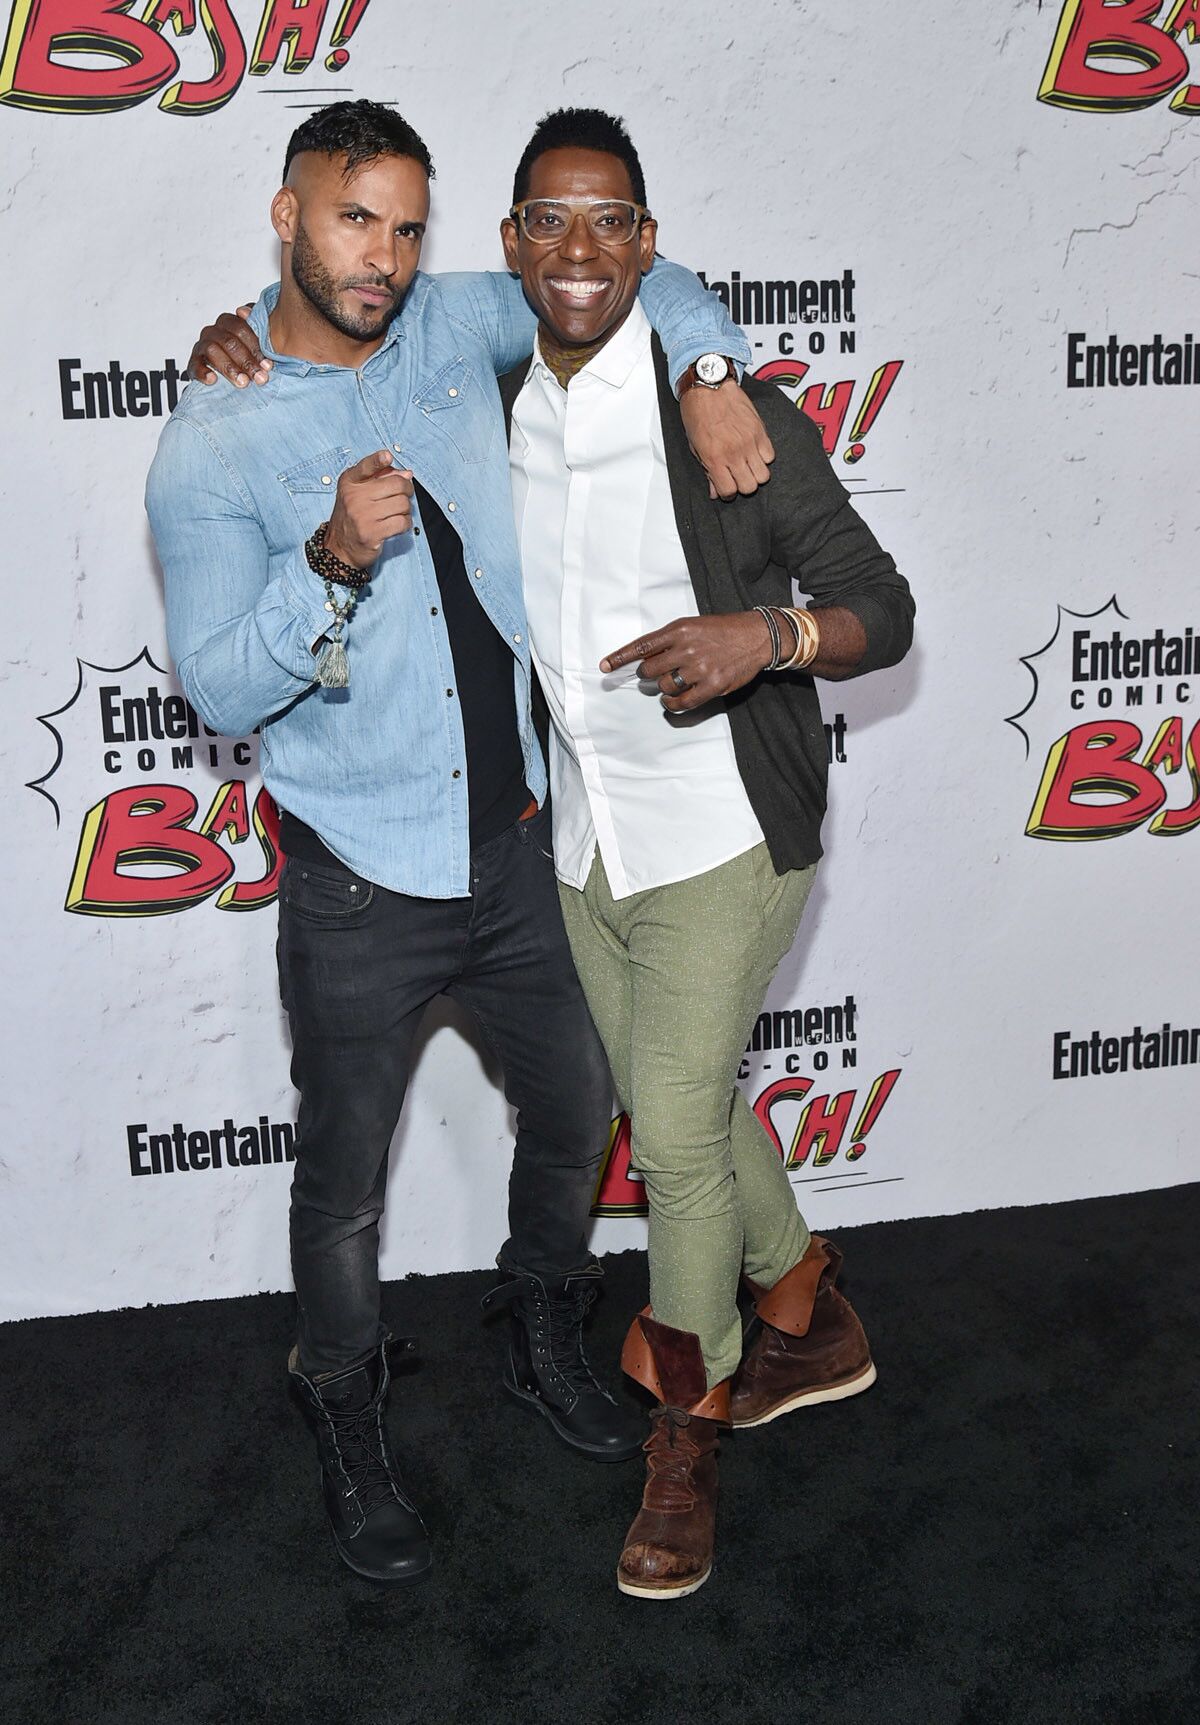 Ricky Whittle and Orlando Jones at Entertainment Weekly's annual Comic-Con party. (Mike Coppola/Getty Images for Entertainment Weekly)